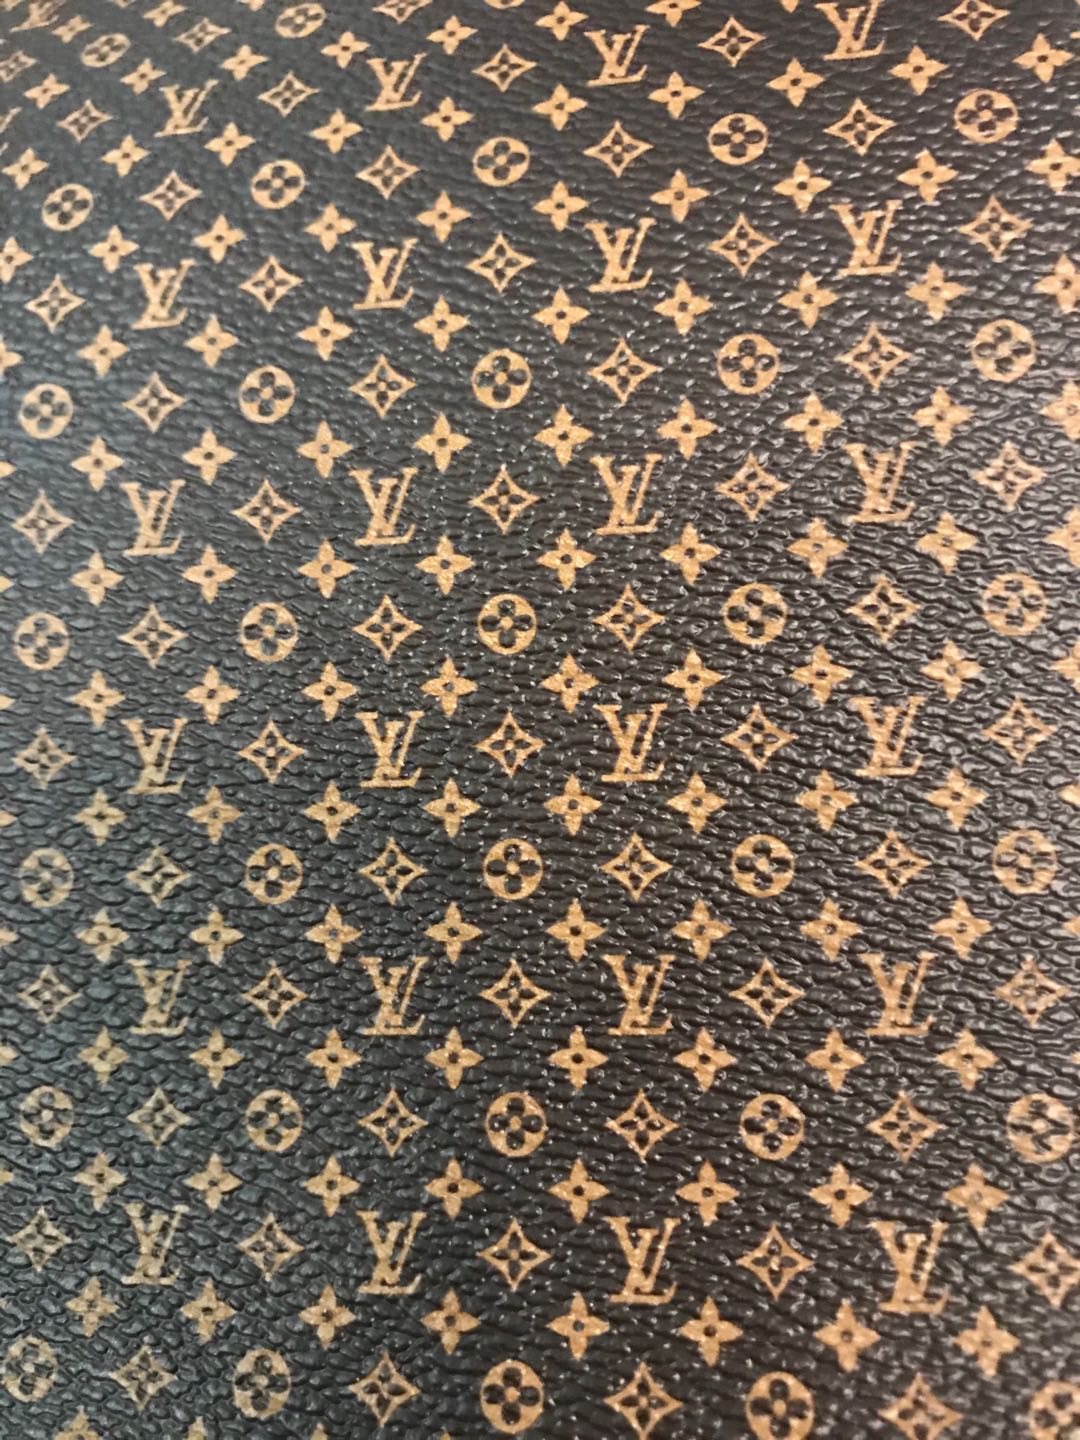 vuitton leather fabric